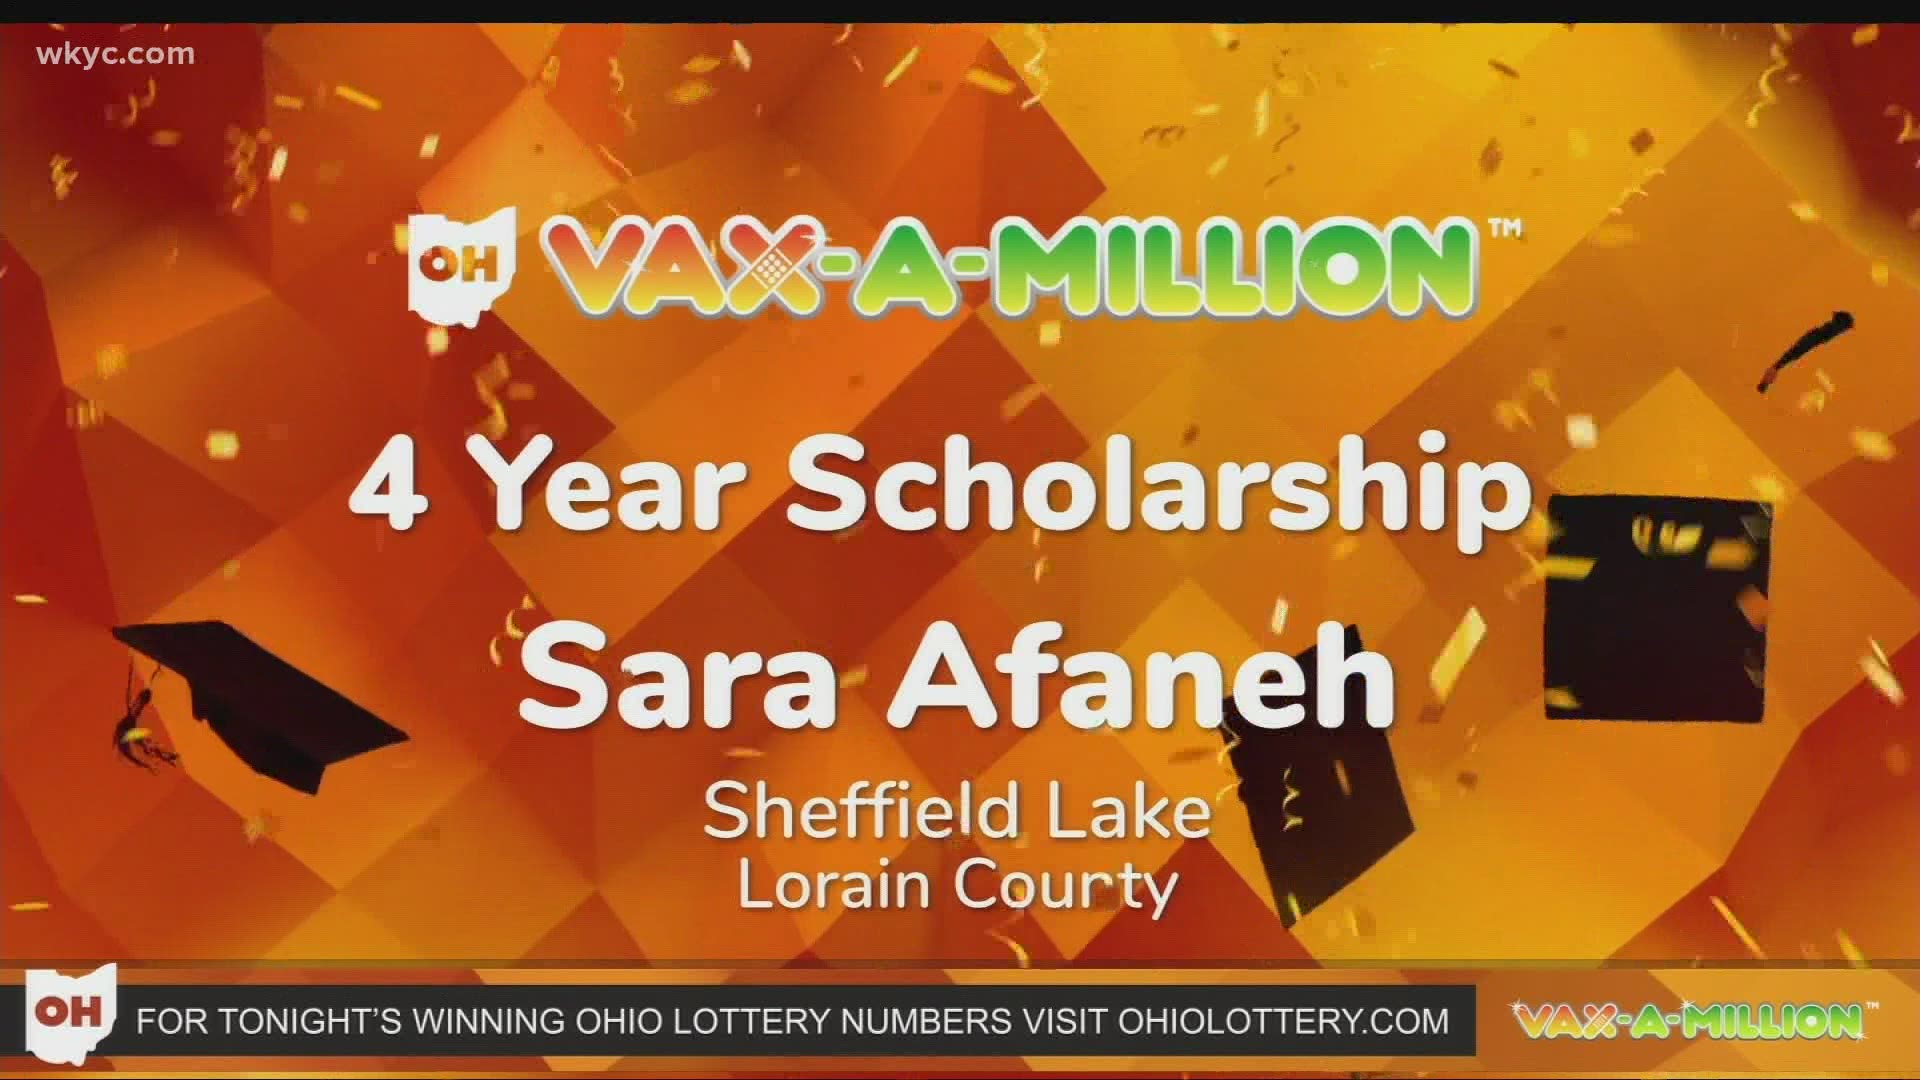 Ohio's third vax-a-million drawing is in the books.  7th grader Sara Afaneh from Sheffield Lake in Lorain County won a full-ride college scholarship.